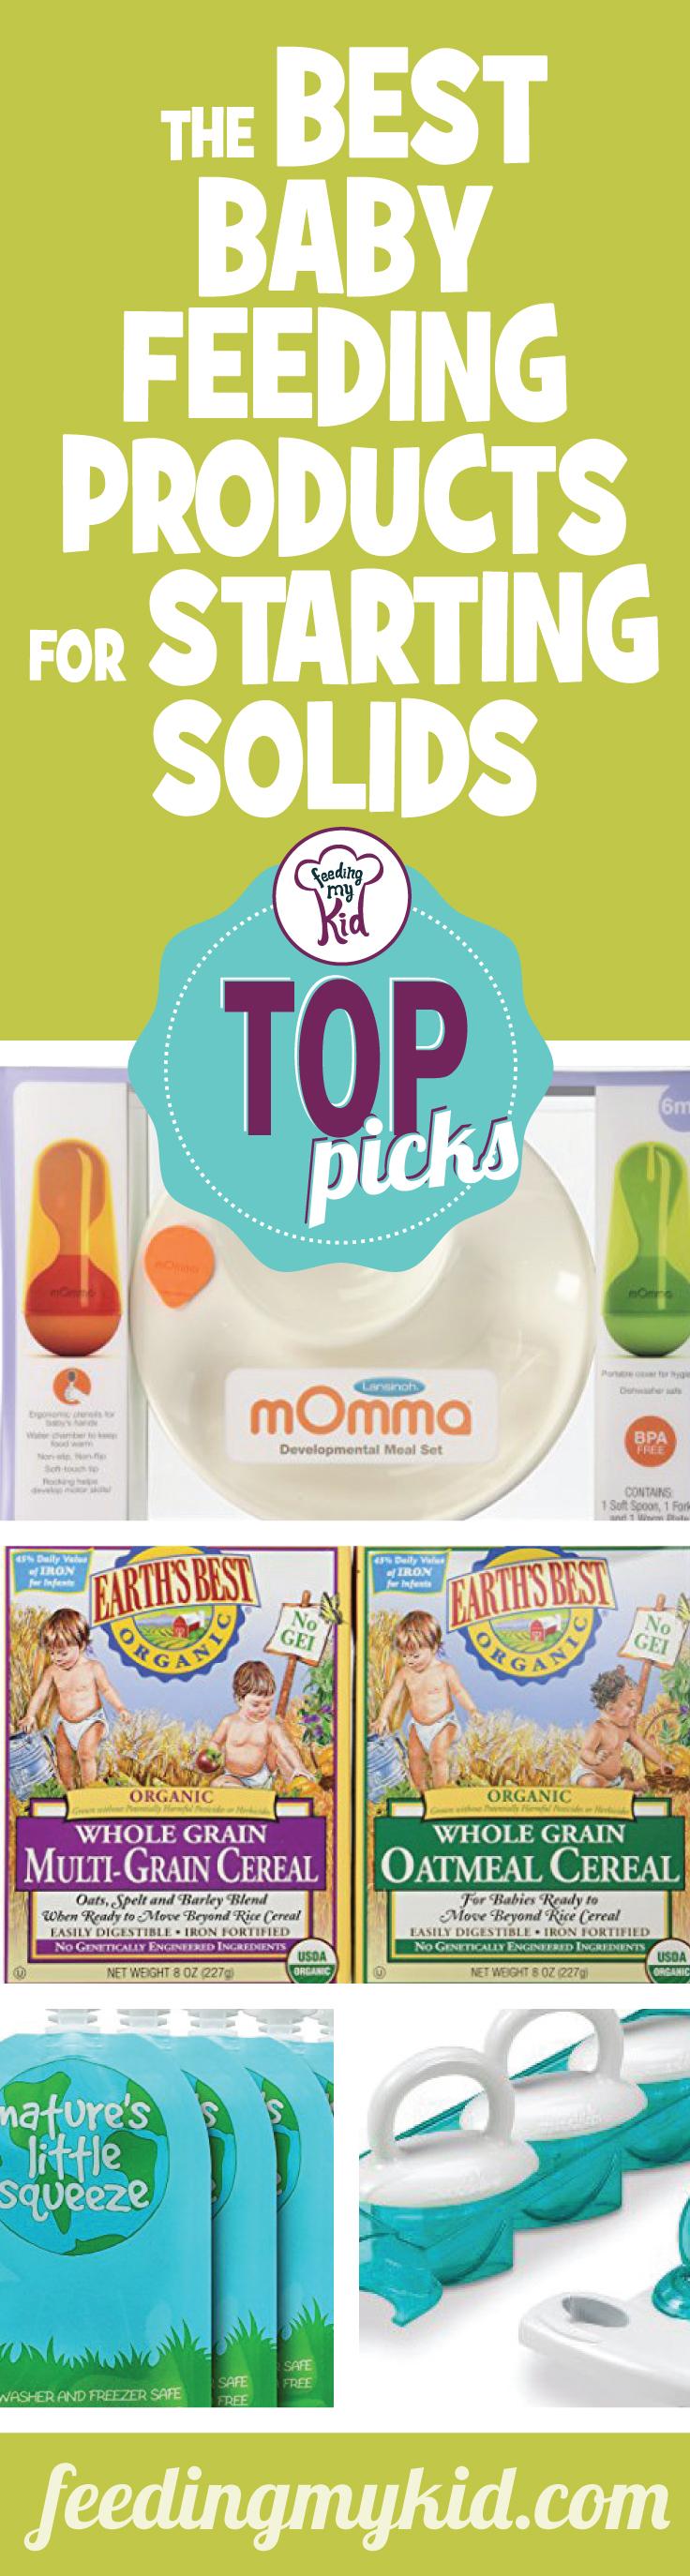 Top Picks: The Best Baby Feeding Products For Starting Solids - This is a must share! It can be very tantalizing introduce solids to your baby. That’s why we put together this great list of perfect products to buy when introducing solids. These products are here to help your baby learn to grow better accustomed to solid foods. From flap gerber cereal rice to a munchkin fresh food feeder; these products are here to help you feed your kid. This is a must pin! #fmk #feedingsolids #introducingsolids #babyfeeding 